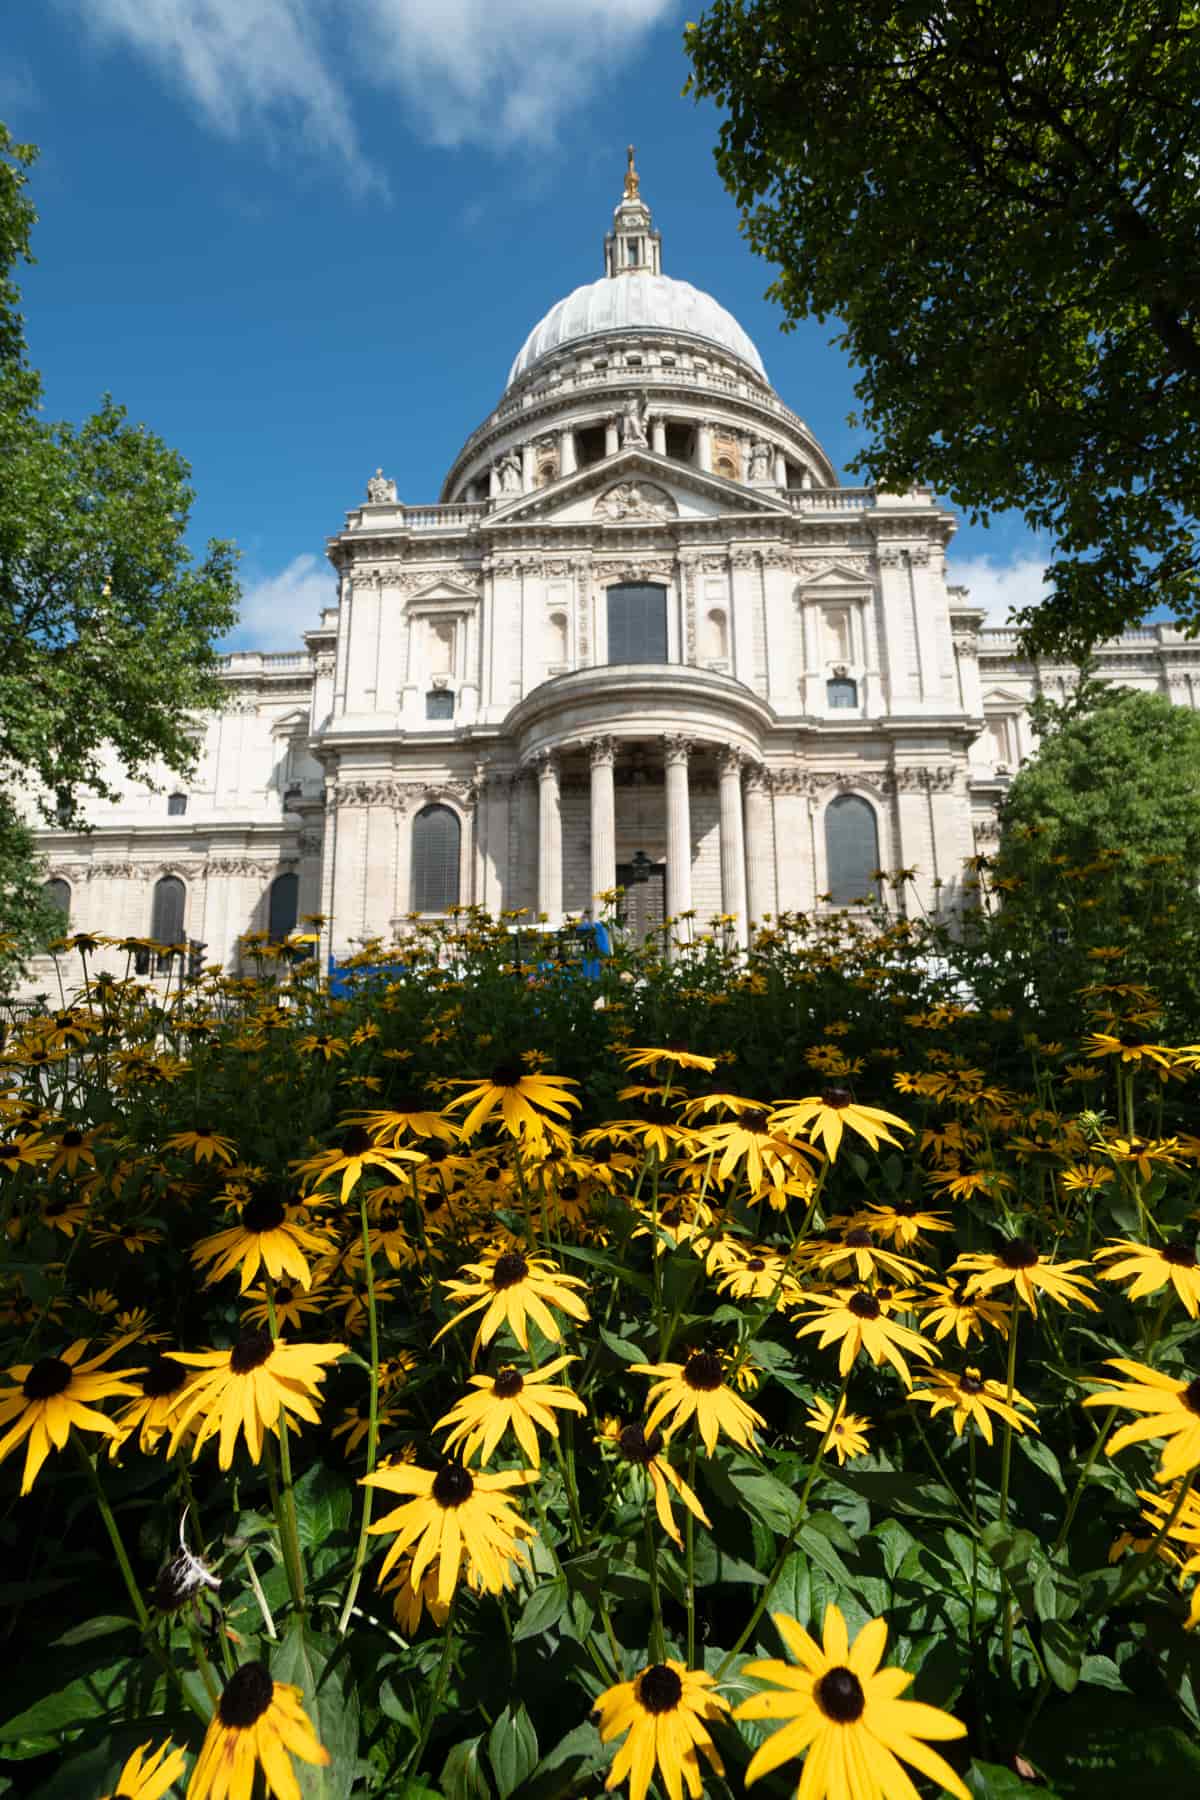 St Pauls with the flowers